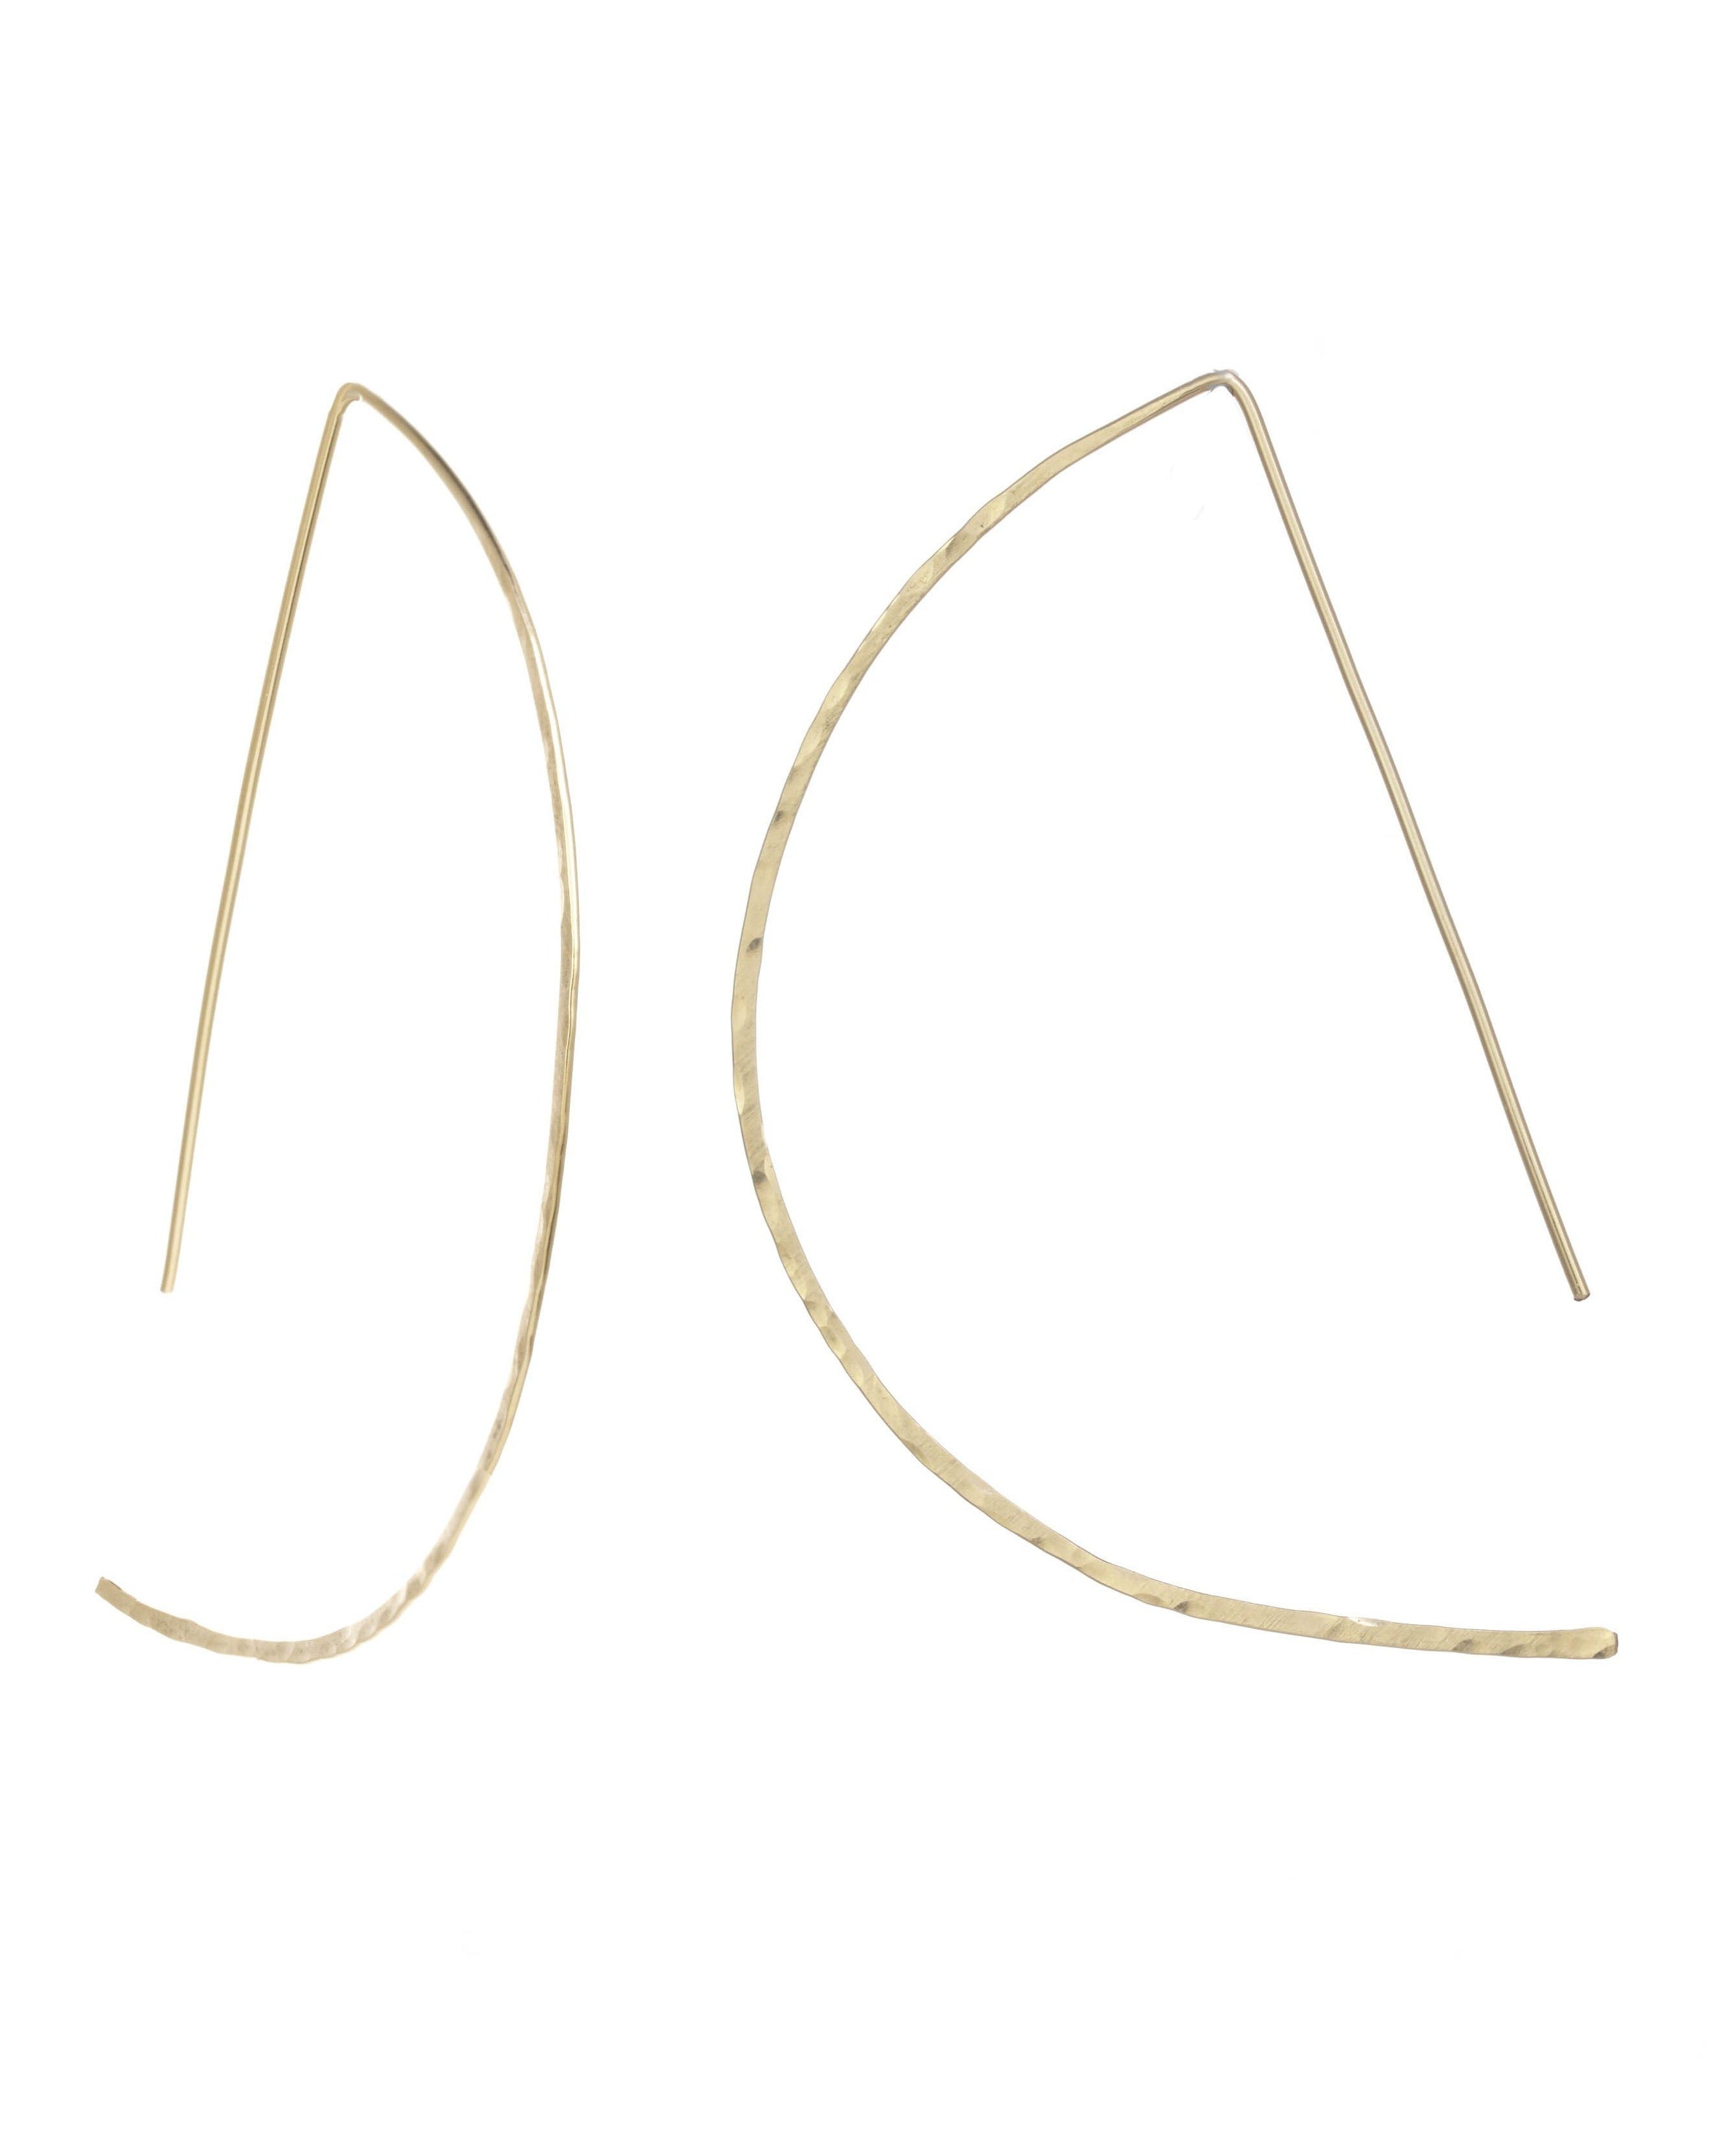 D Earrings Large by KOZAKH. D shape hammered wire earrings, crafted in 14K Gold Filled.